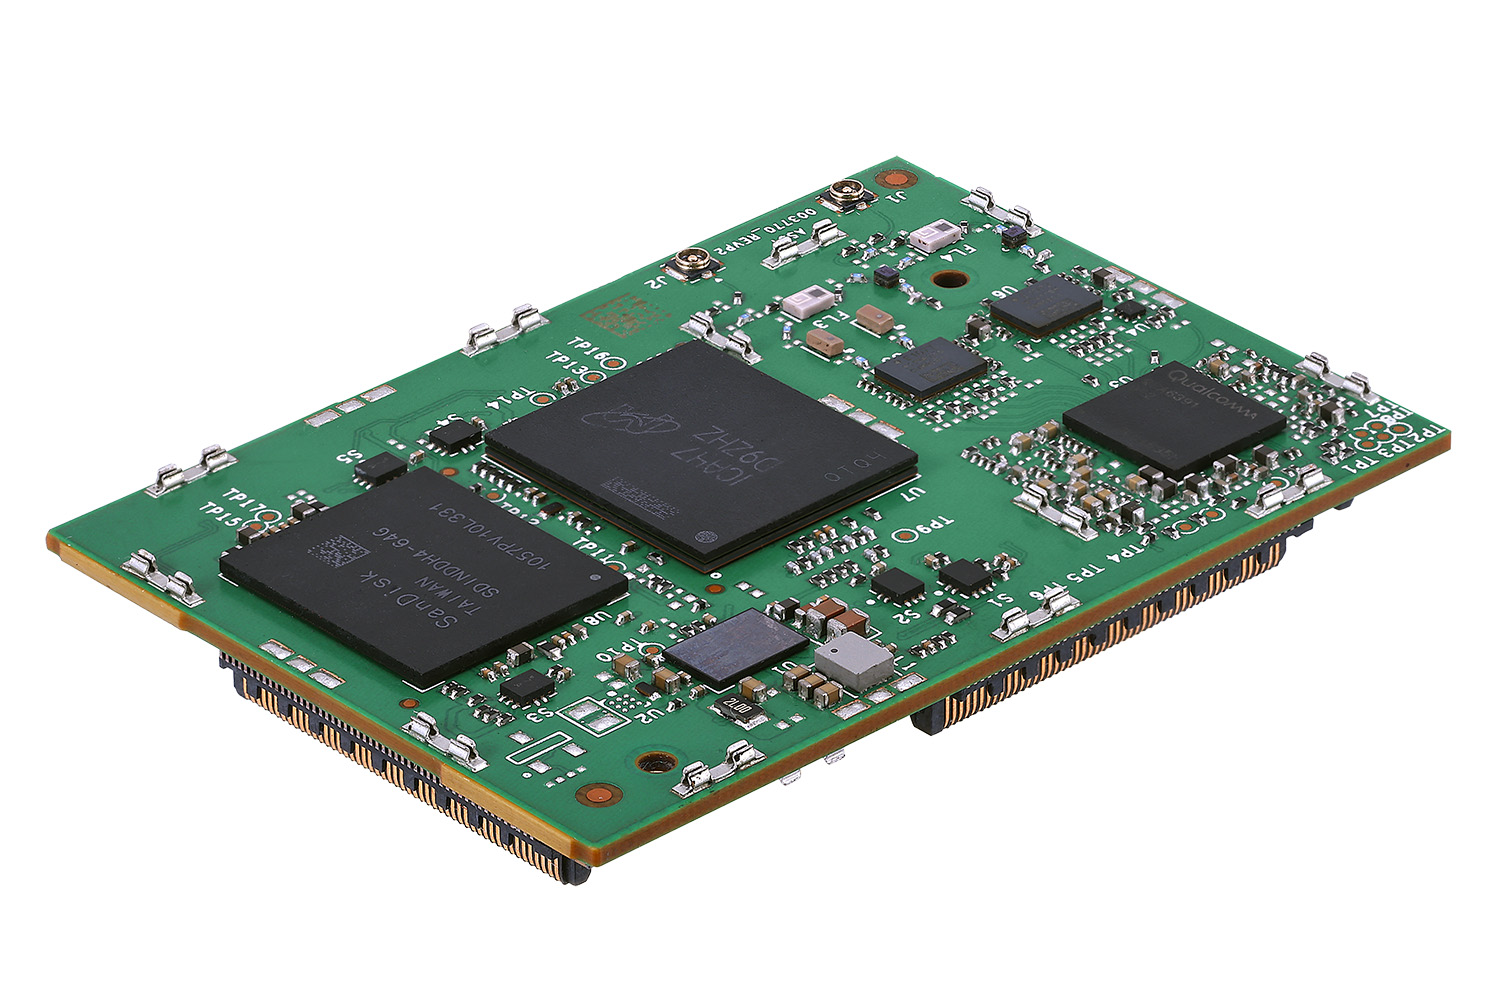 Introducing Inforce 68A1, a powerful new system-on-module designed to enable advanced IoT vision system devices